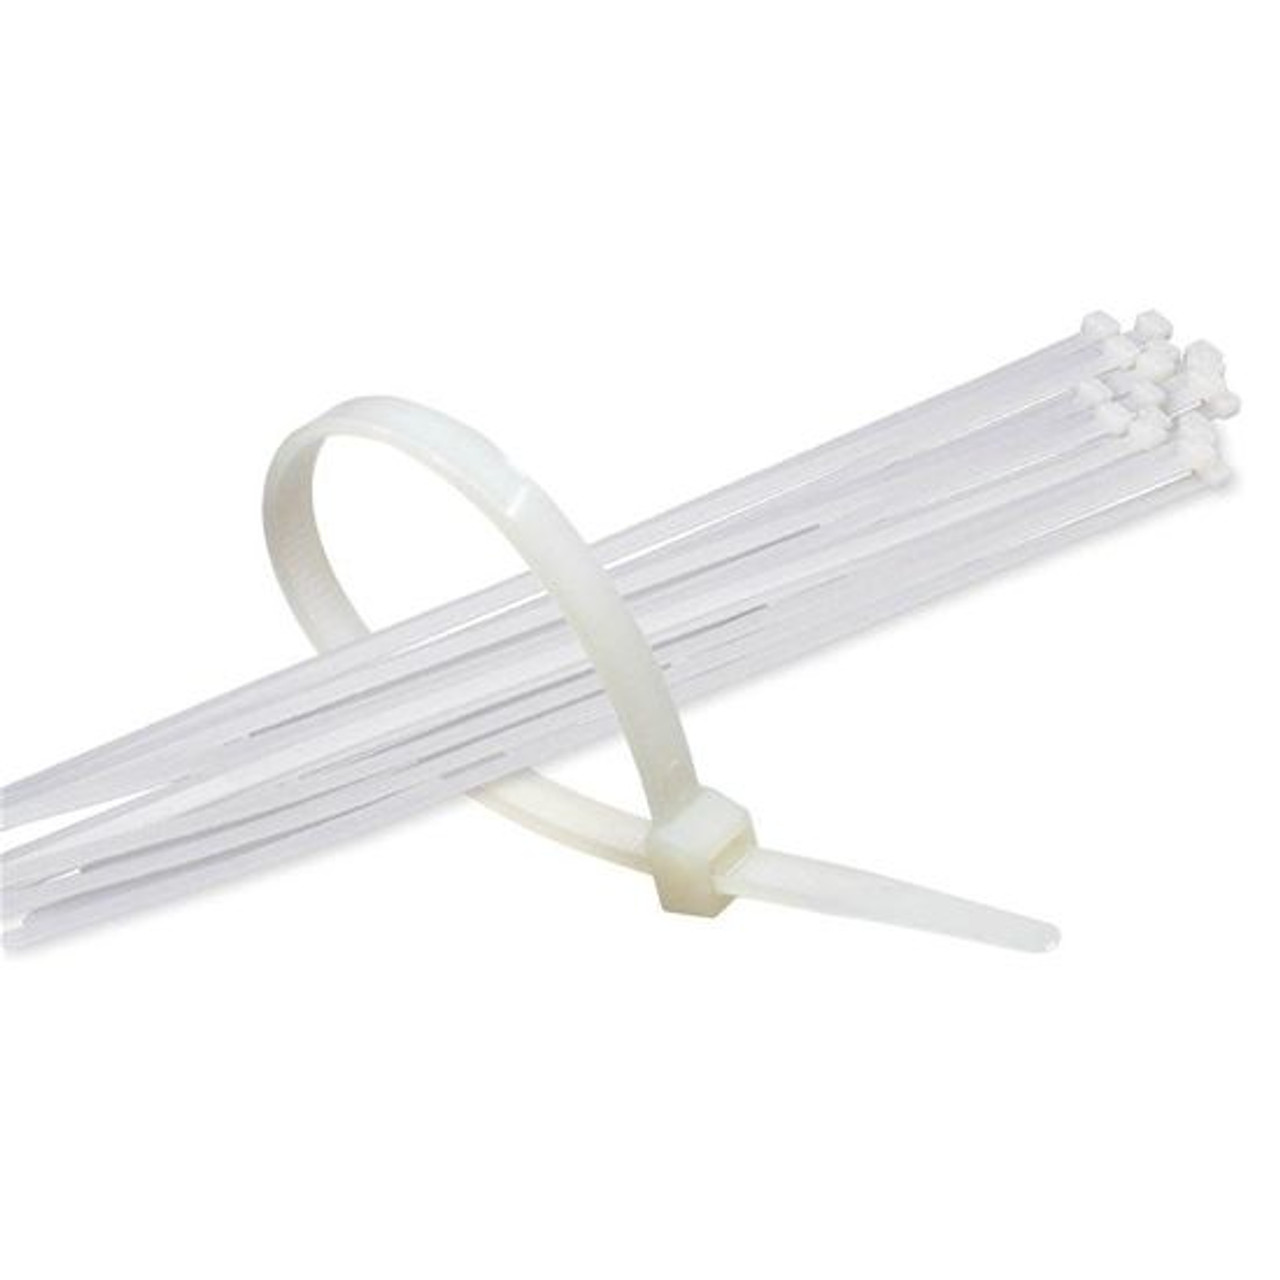 Vanco 10" Inch Cable Ties Natural 50 Lb 10 Pack Quick Wire Zip Tie Bundle Easy Lock Opaque Straps, Coax Cable Telephone Cat 5e Data Line Organizer UL Listed